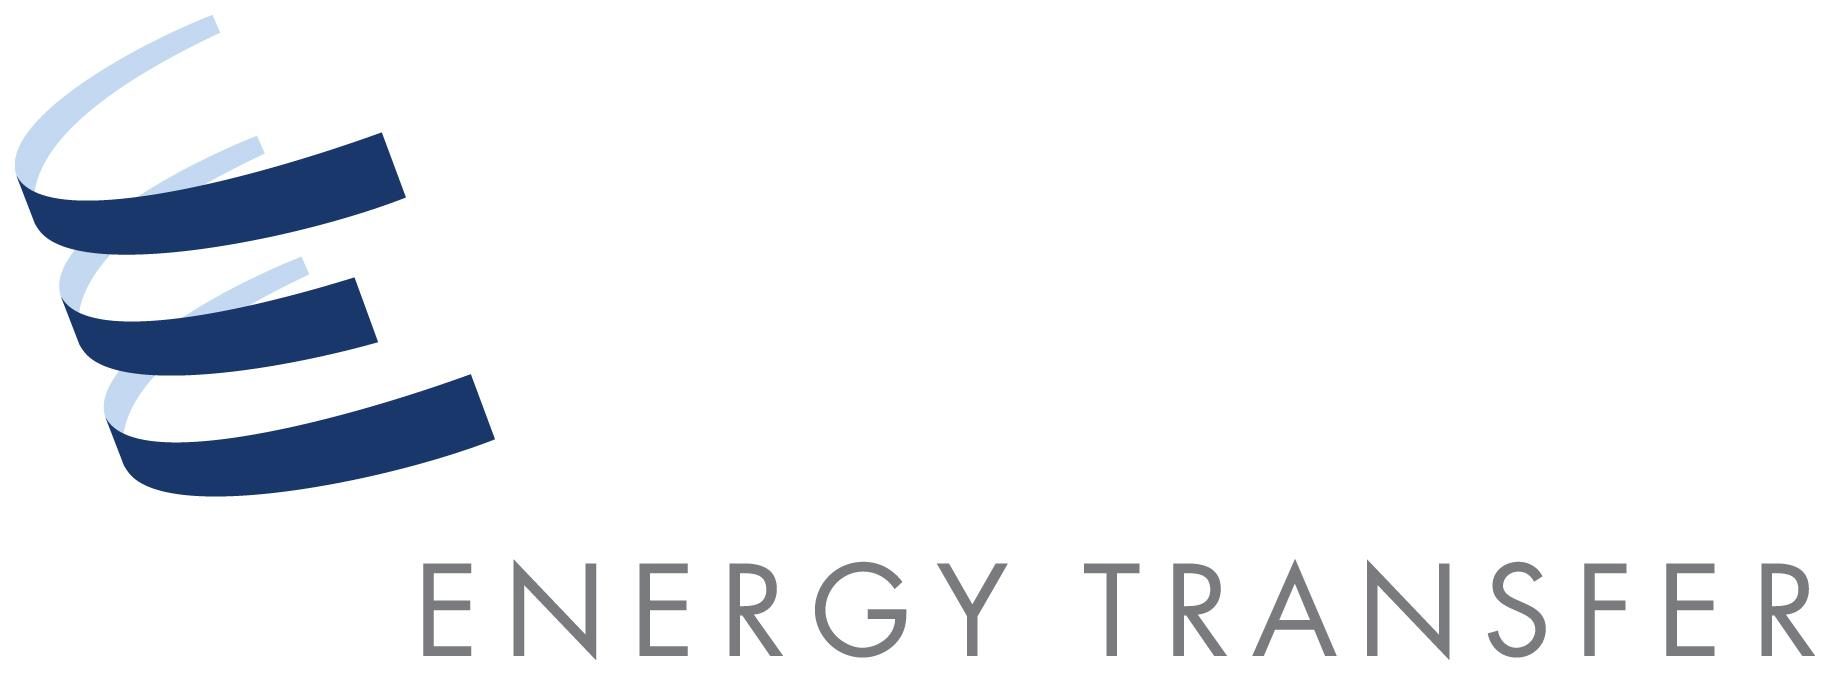 Energy Transfer merger with Williams Companies approved with conditions